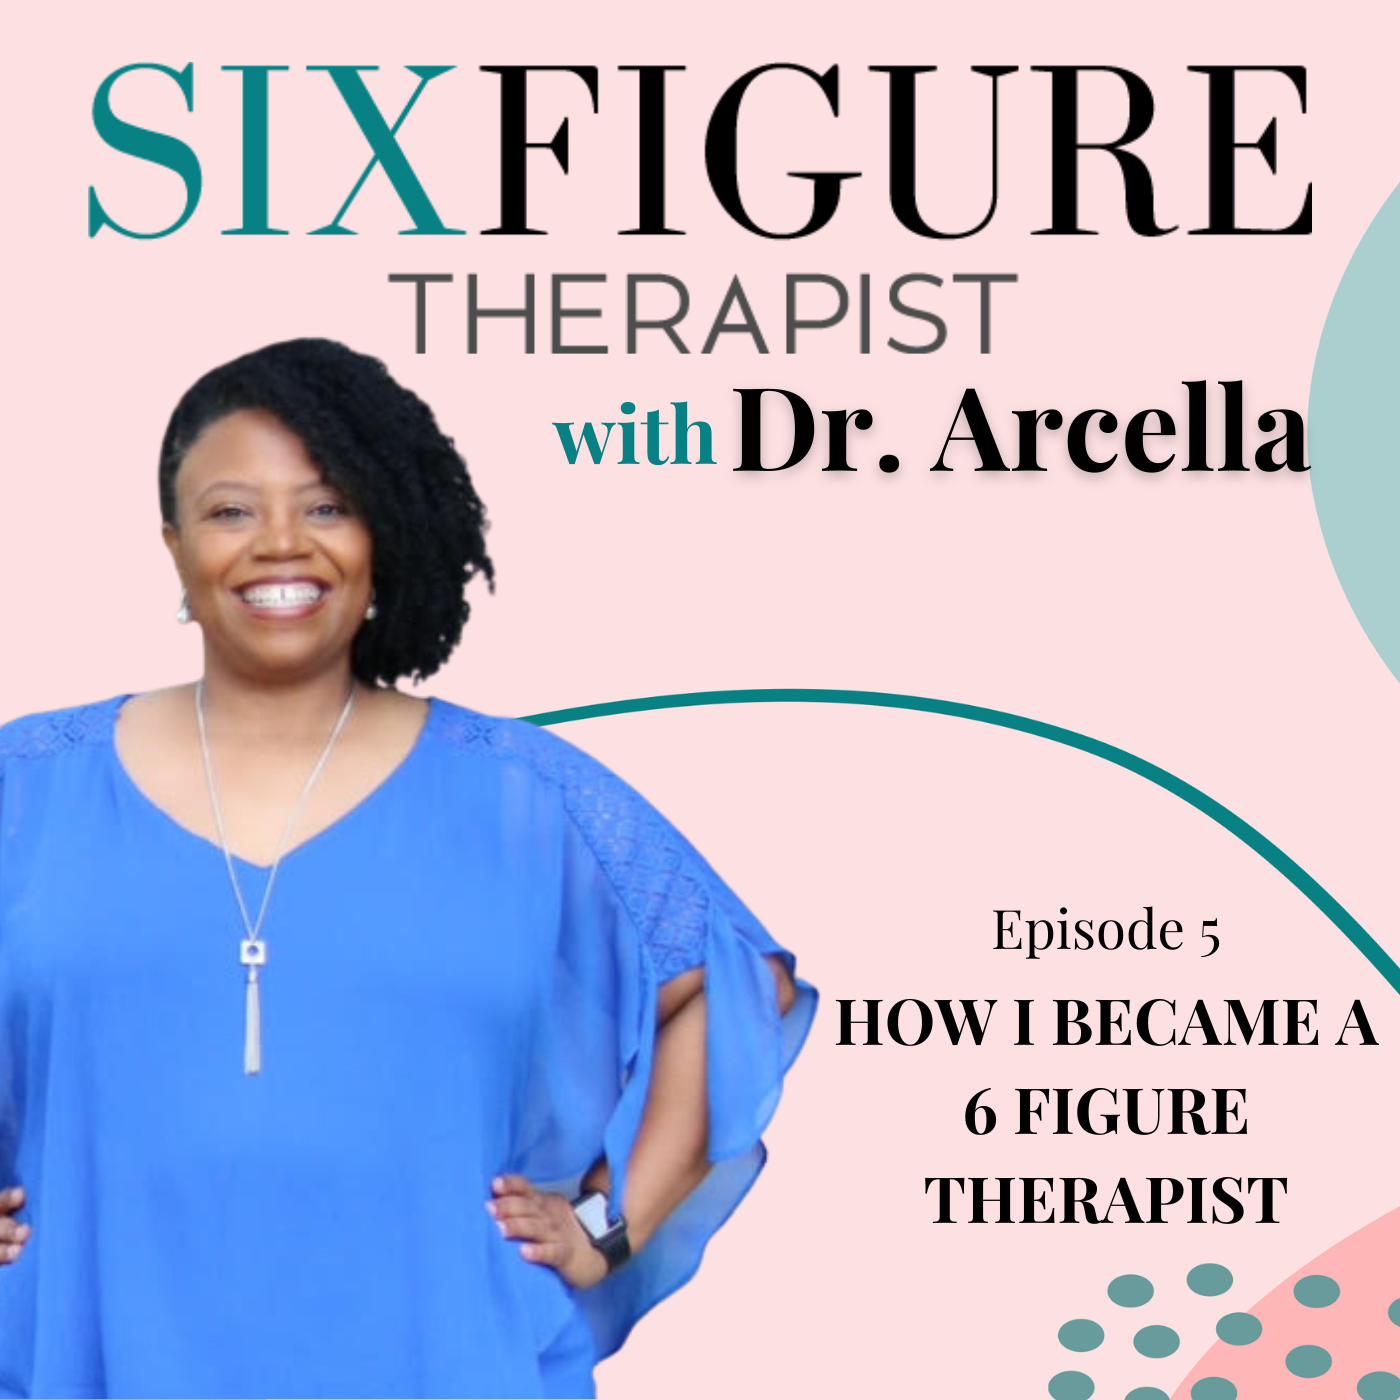 How I Became a 6 Figure Therapist